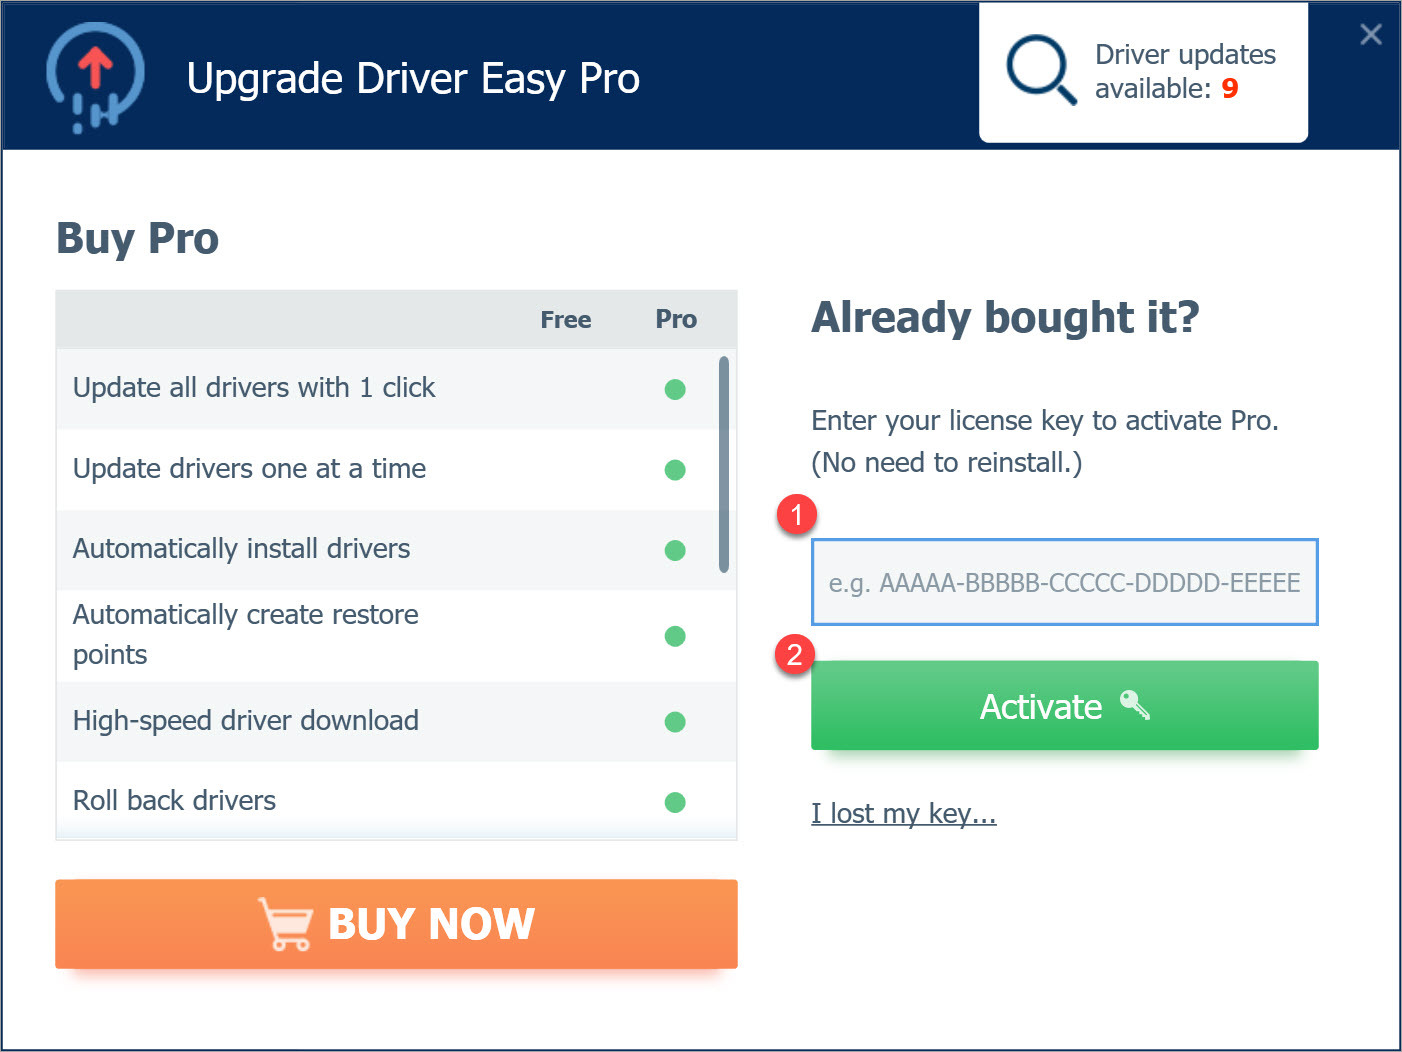 Upgrade to Driver Easy Pro enter license